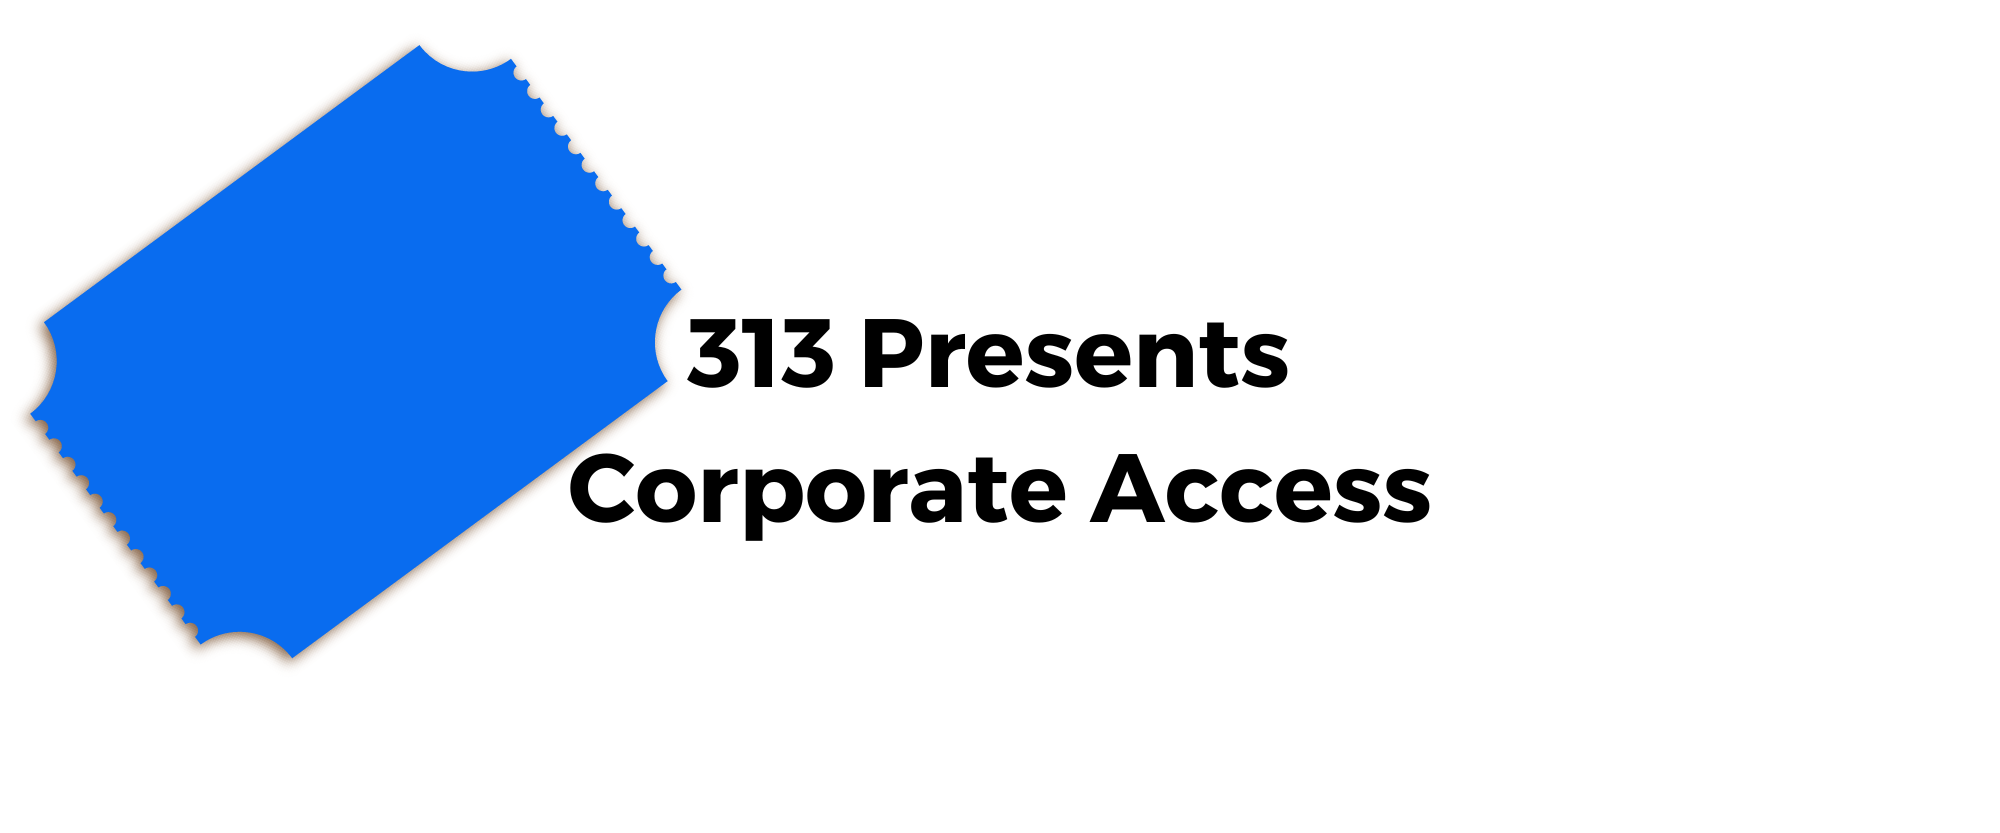 313 Presents Corporate Access.png